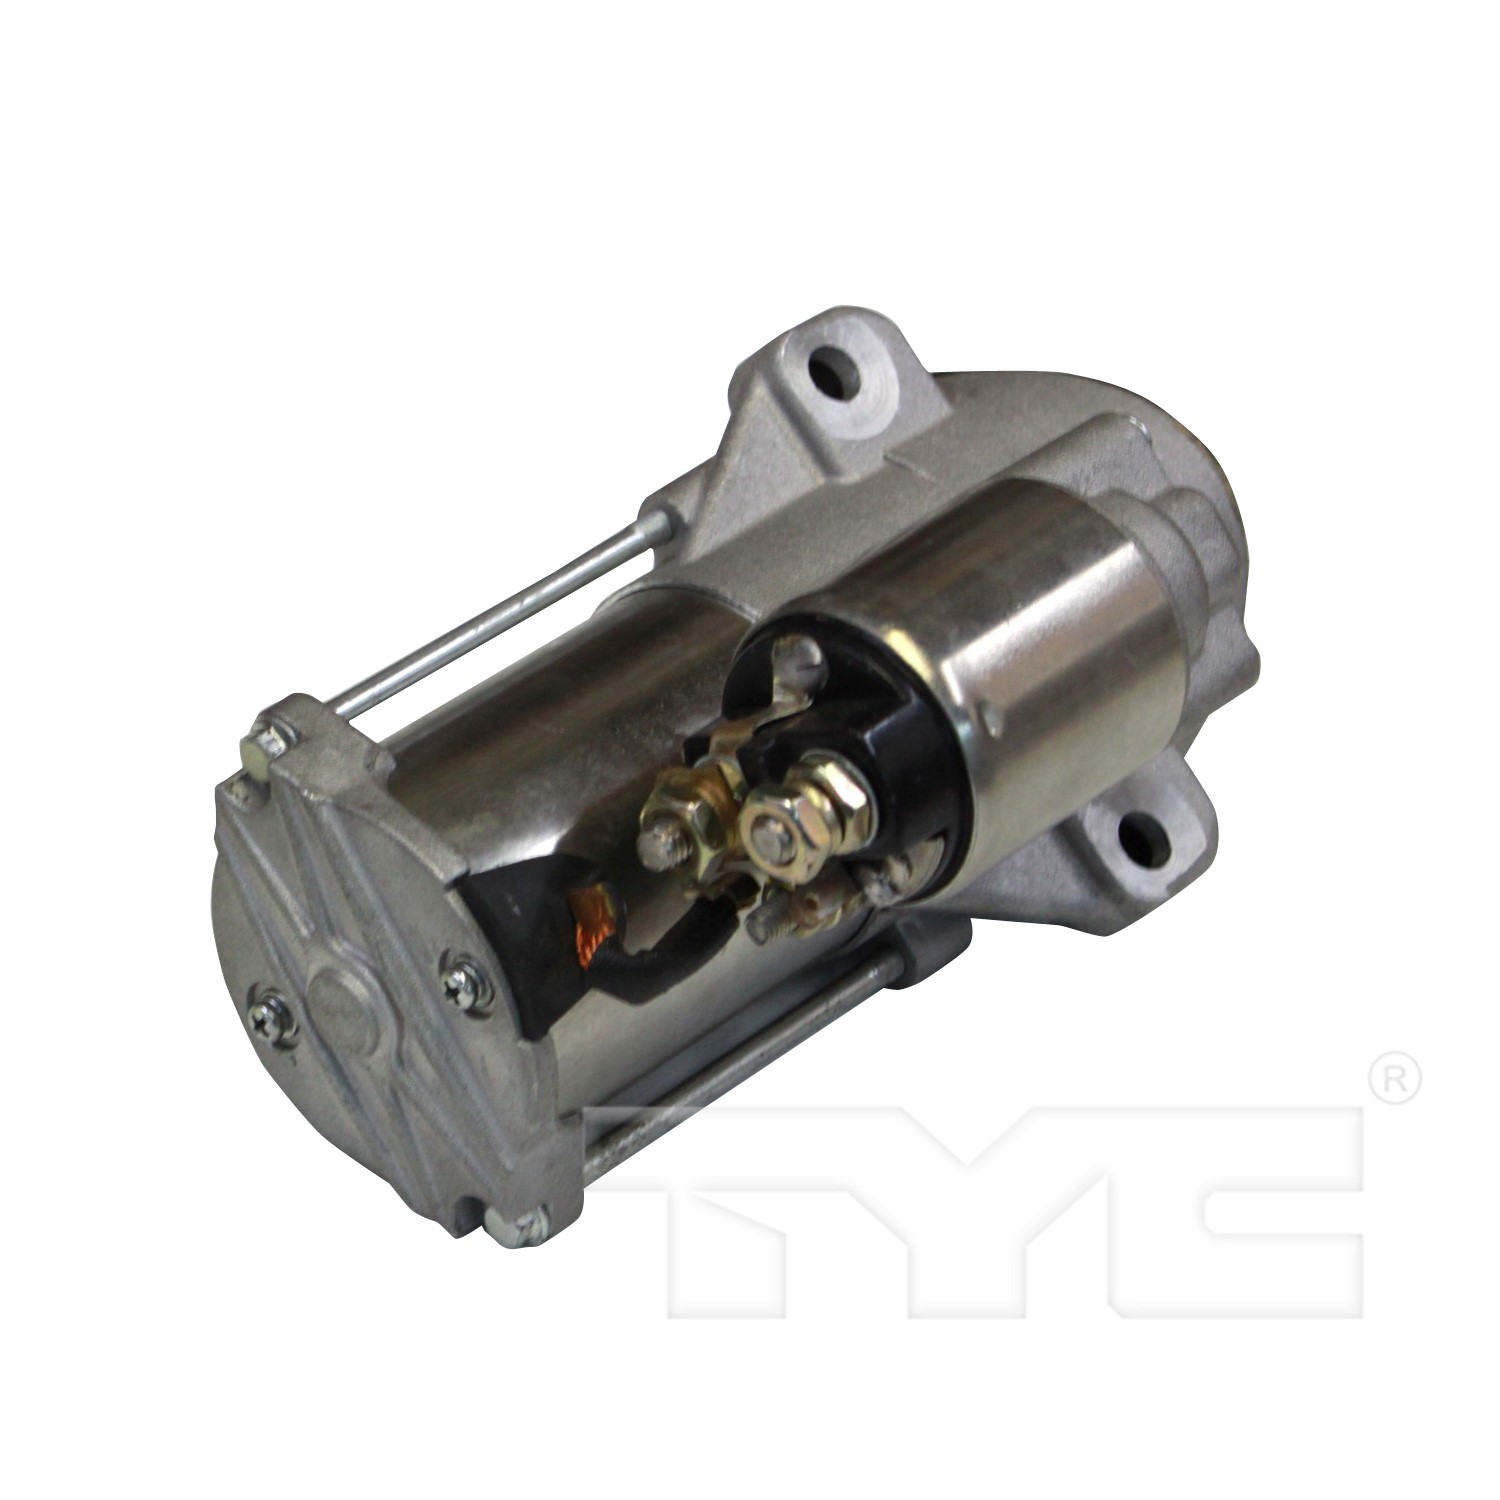 TYC-1-06692_NEW TYC STARER 12V 10T CCW PMGR FORD PMGR